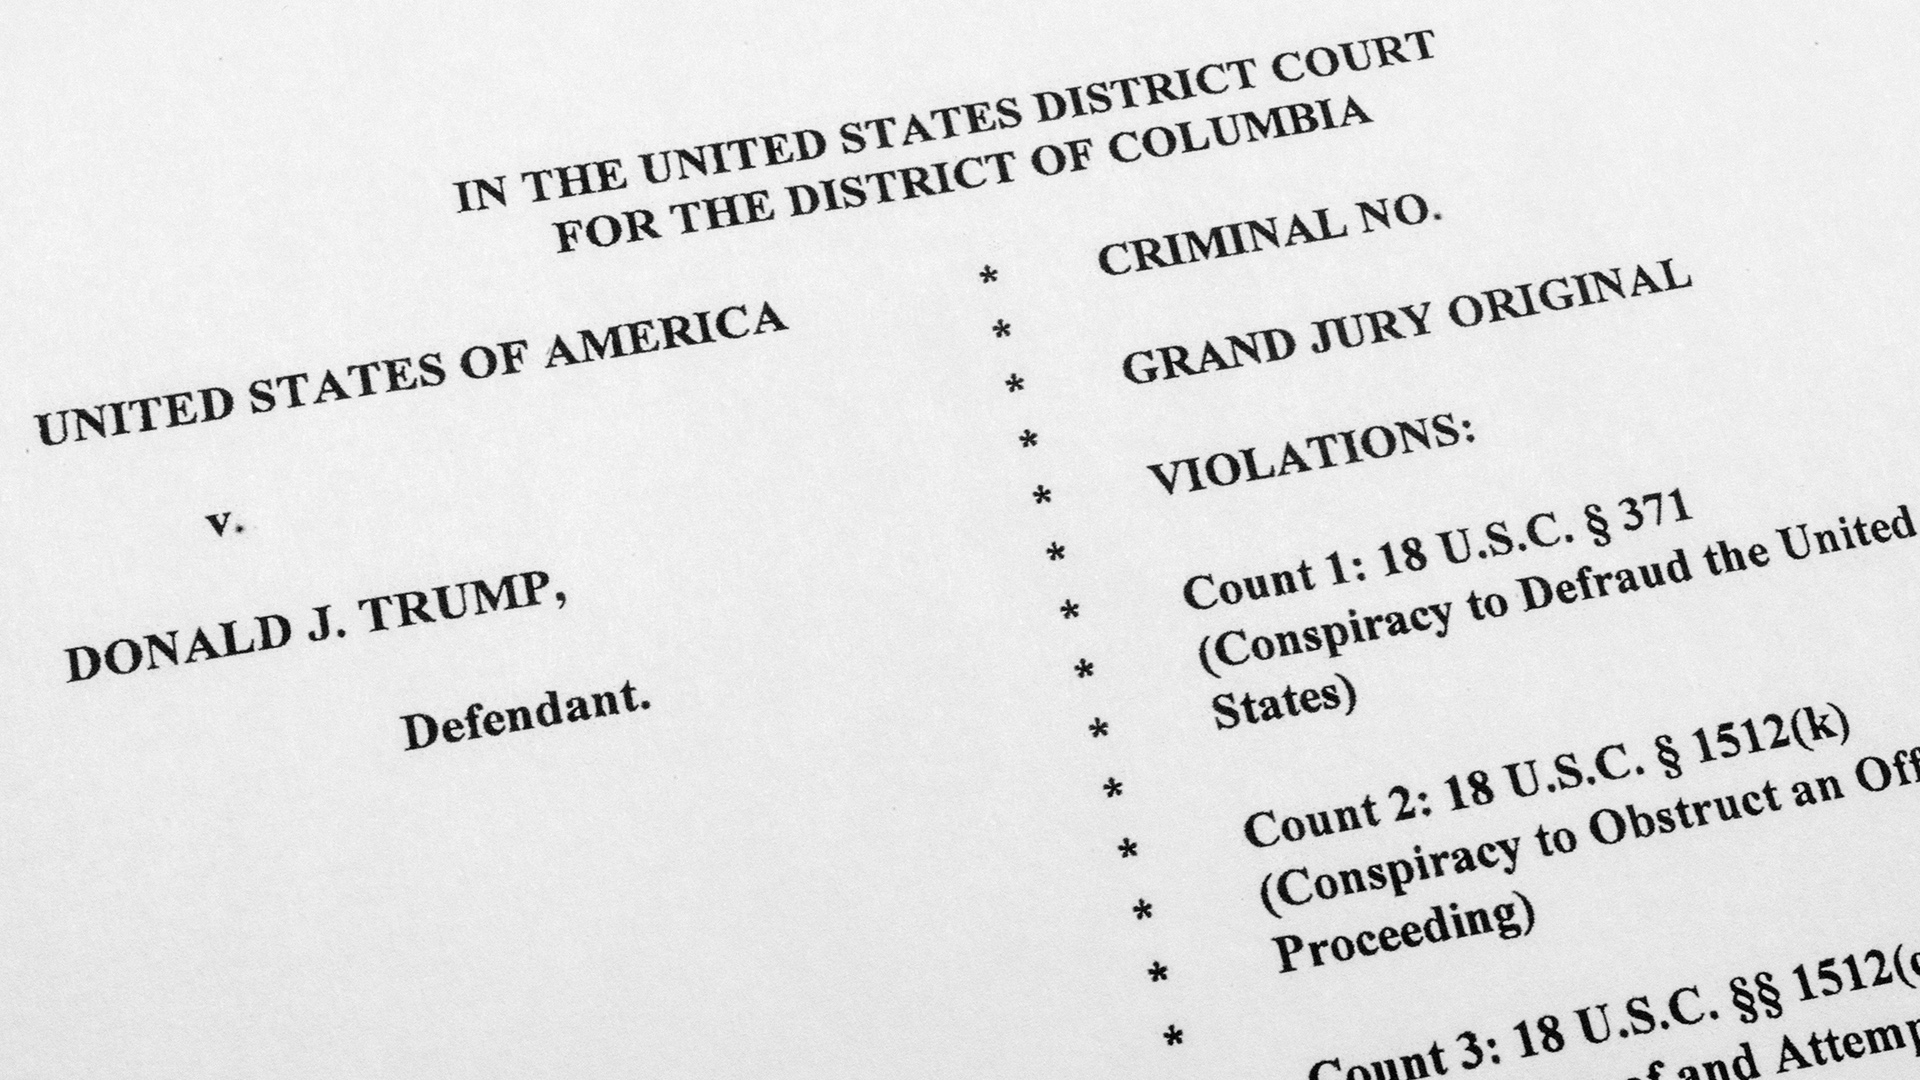 Printed text on a piece of paper reads "In the United States District Court for the District of Columbia" and "United States of America v. Donald J. Trump, Defendant," with additional text listing criminal violations.